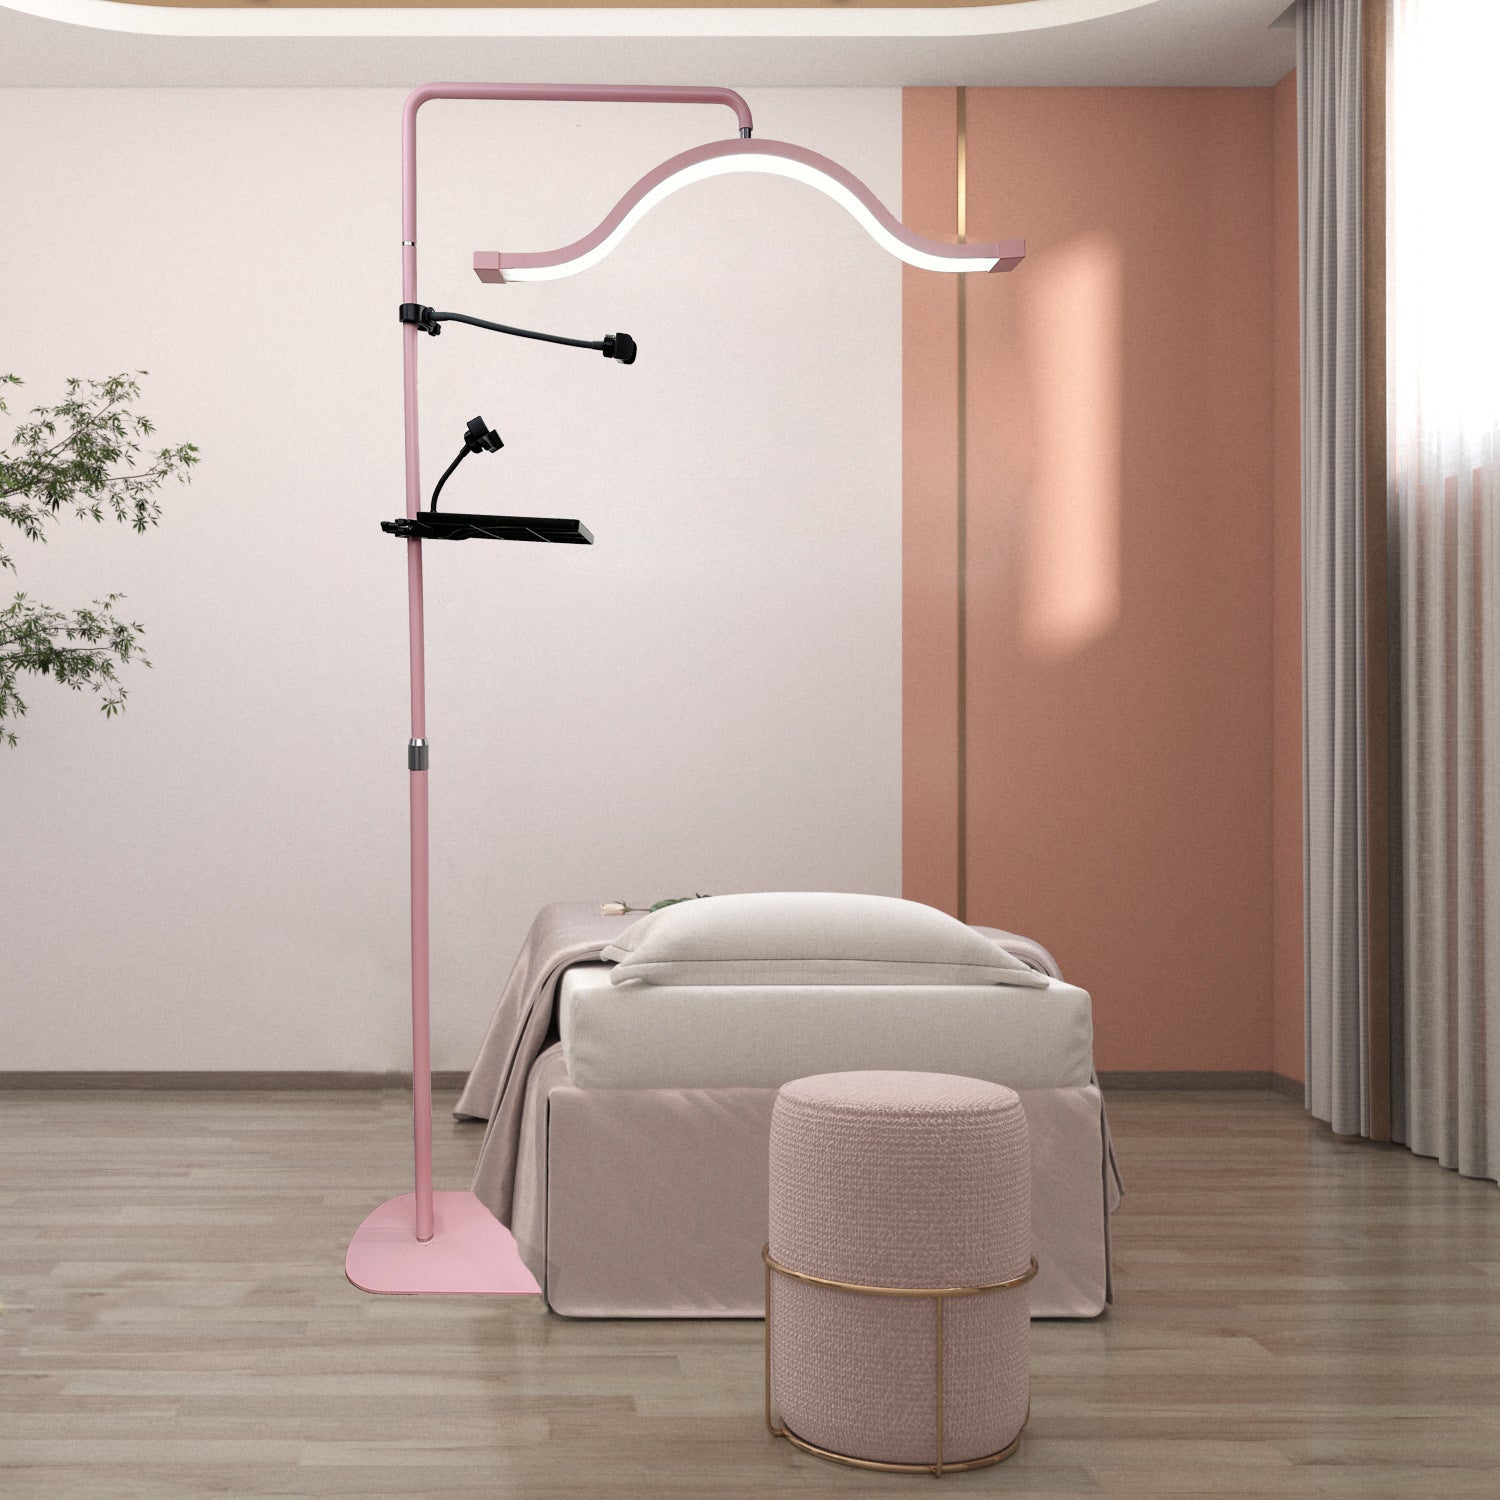 Led Cloud Floor Lamp For Lashes Tattoo Beauty